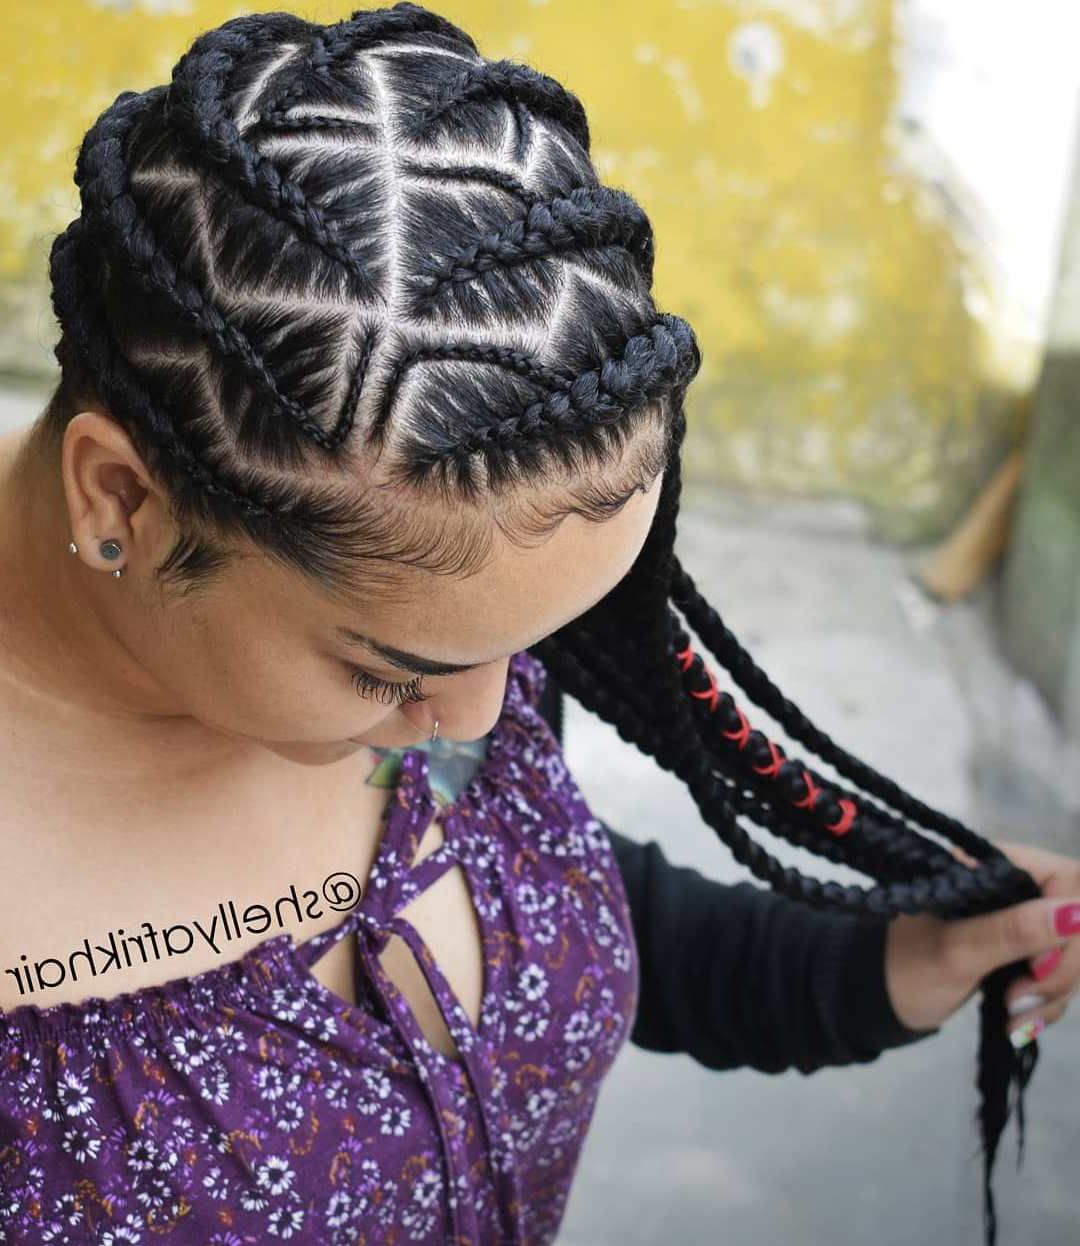 Favorite Metallic Side Cornrows Braided Hairstyles With Regard To 20 Head Turning Lemonade Braid Styles For All Ages (View 4 of 20)